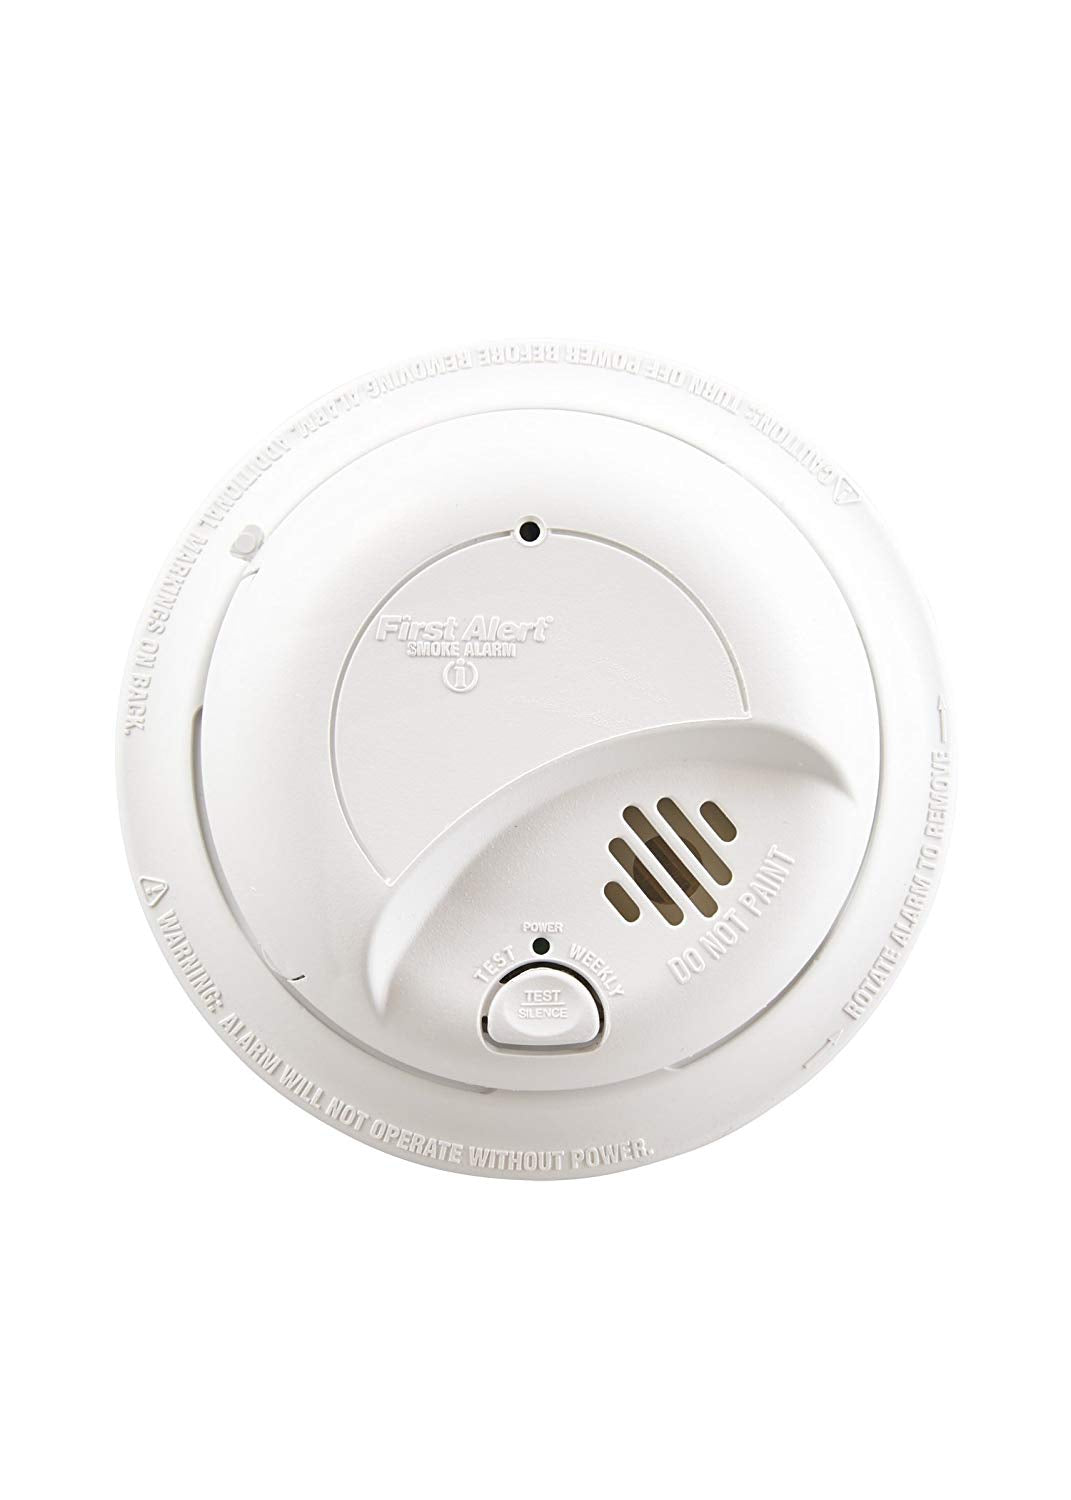 First Alert 1039809 Hardwired Ionization Smoke Alarm with Battery Backup